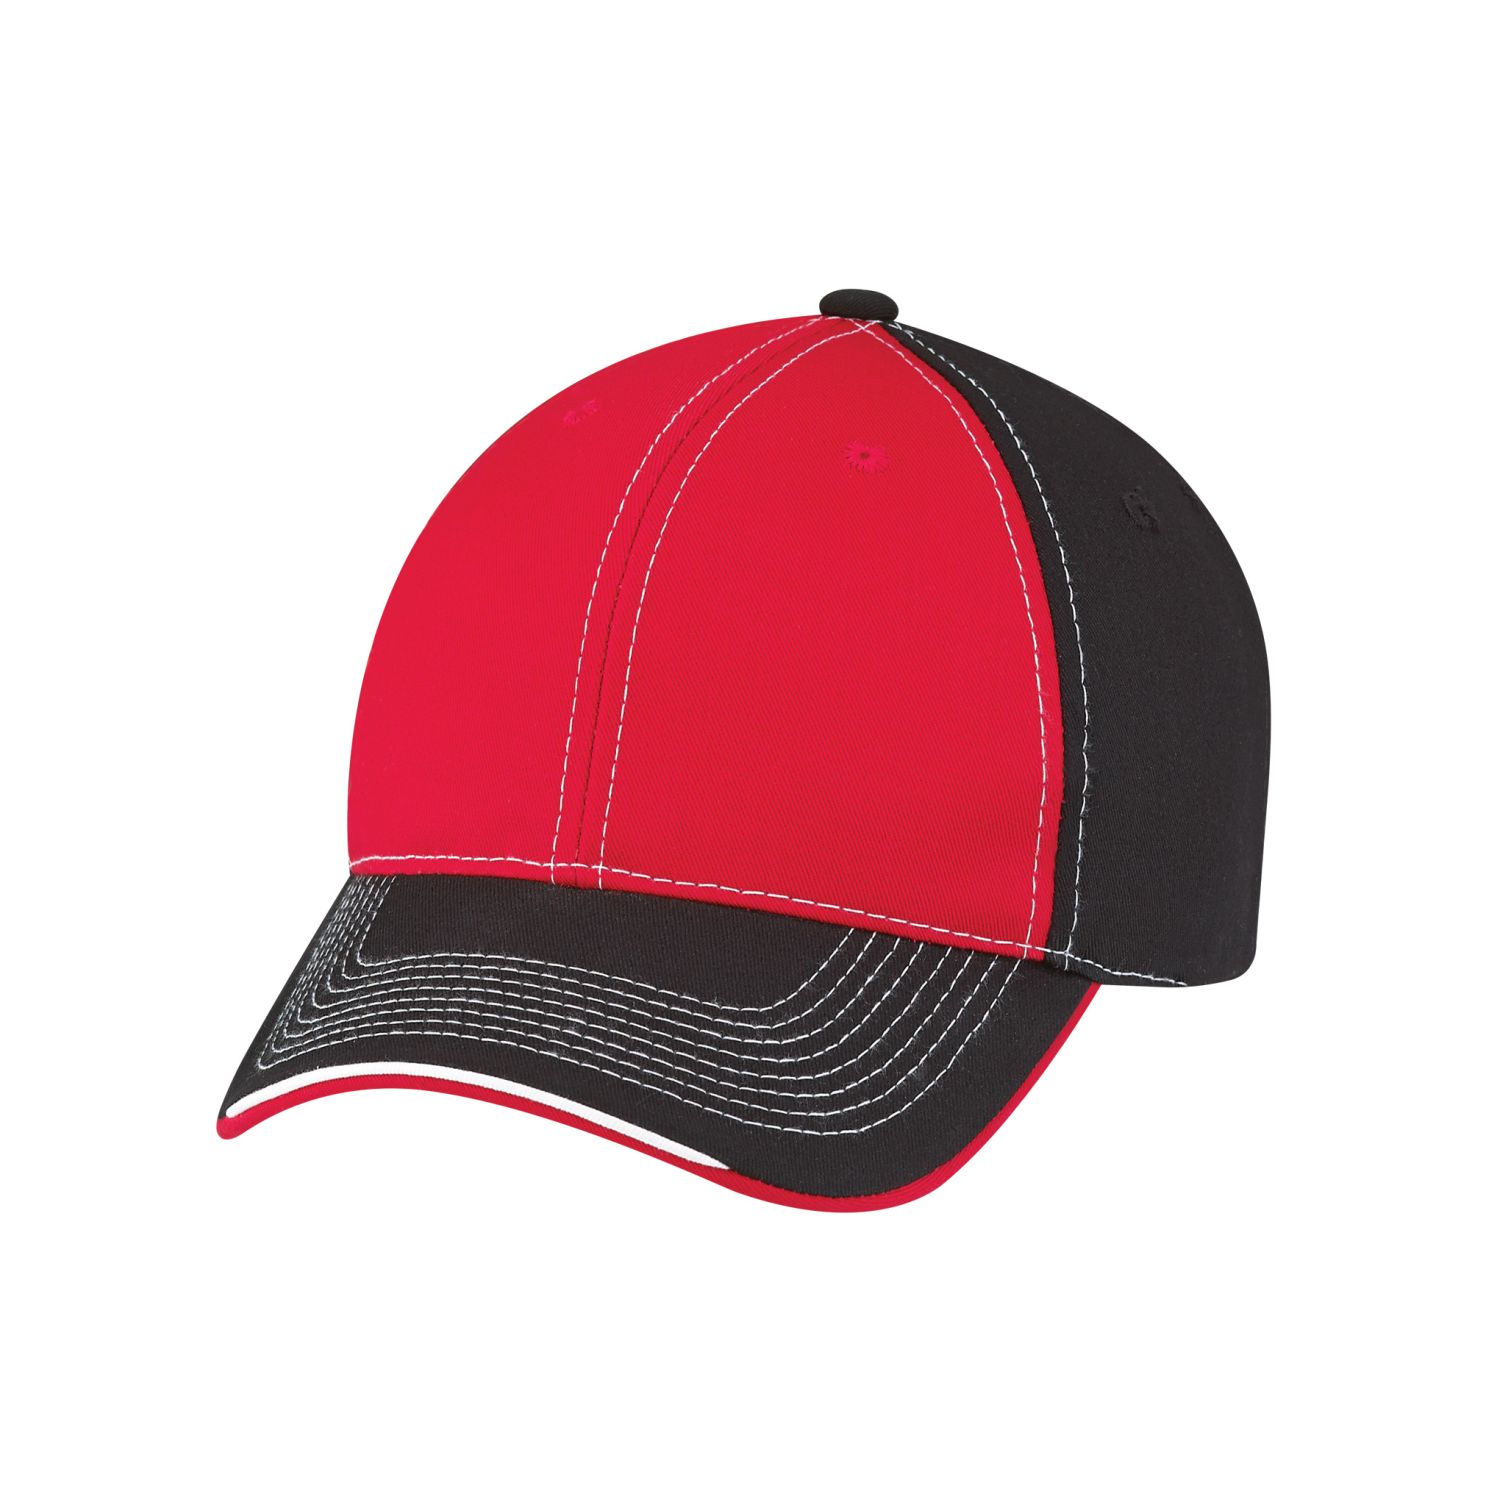 AJM 6-Panel Constructed Full-Fit Hat #6F617M Black / Red / White